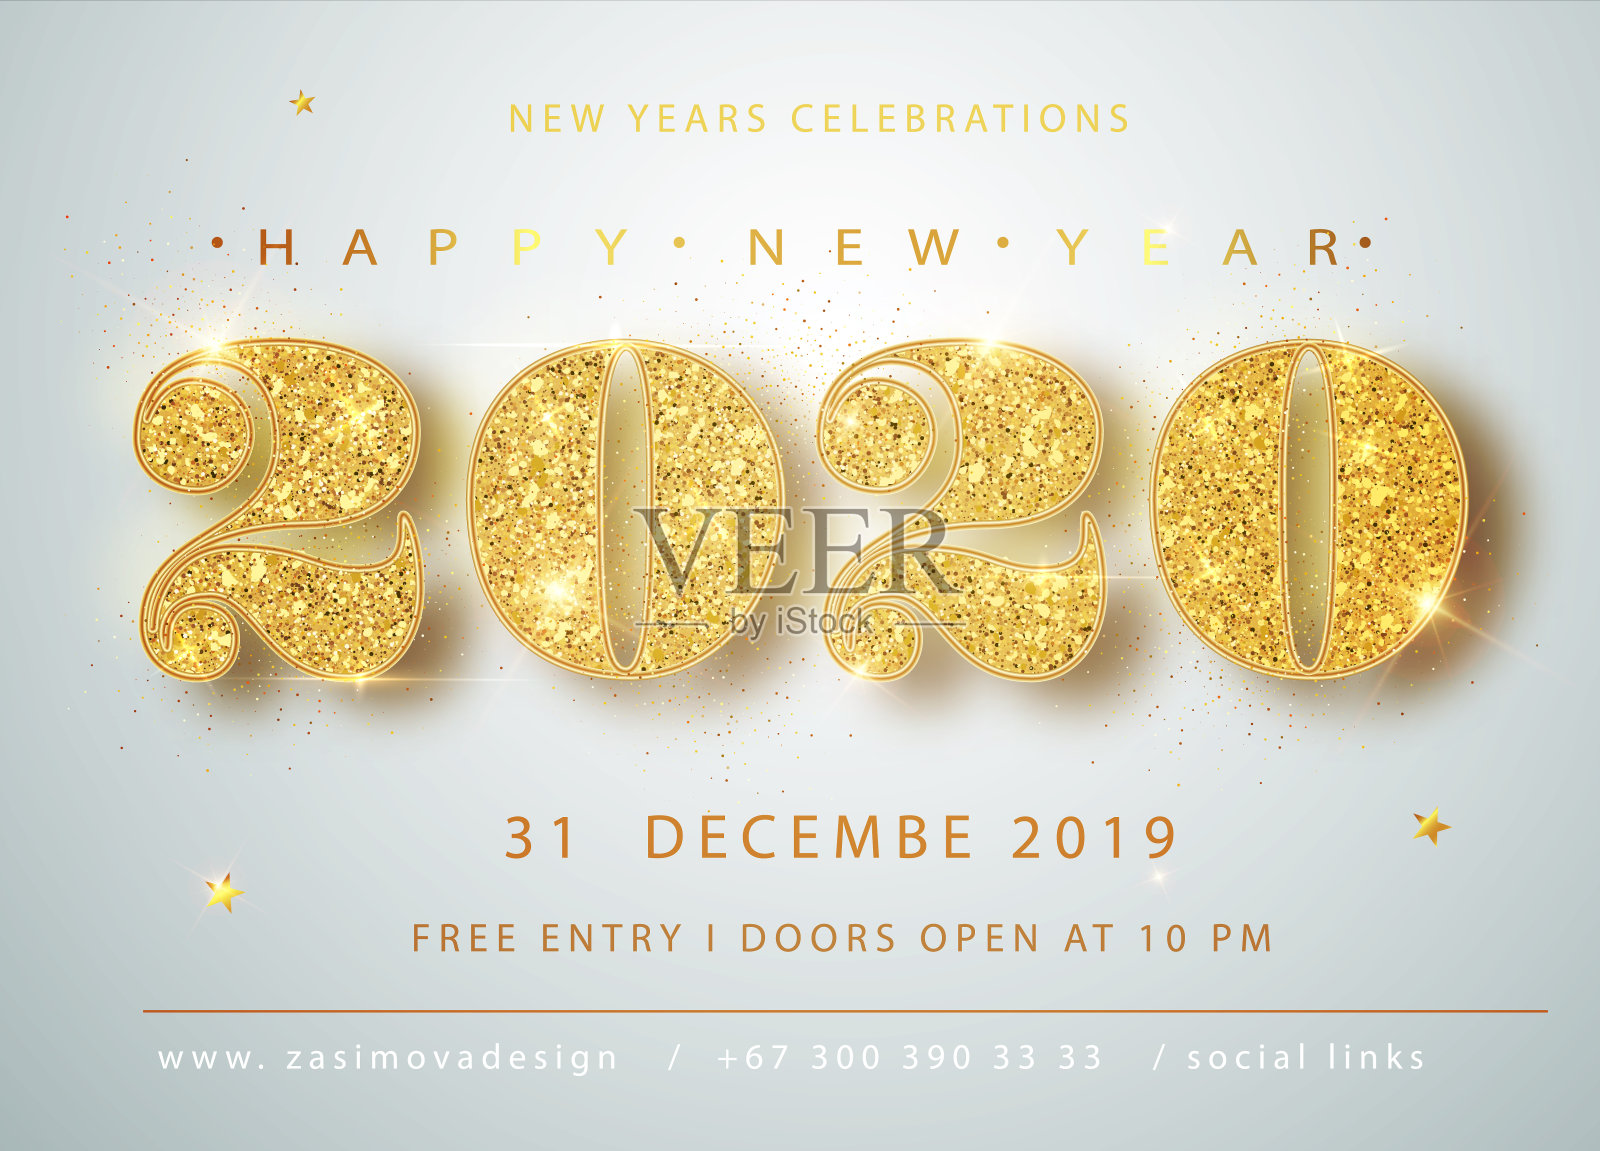 Happy New 2020 Year. Holiday vector illustration of golden metallic numbers 2020. Realistic sign. Festive poster or banner design插画图片素材